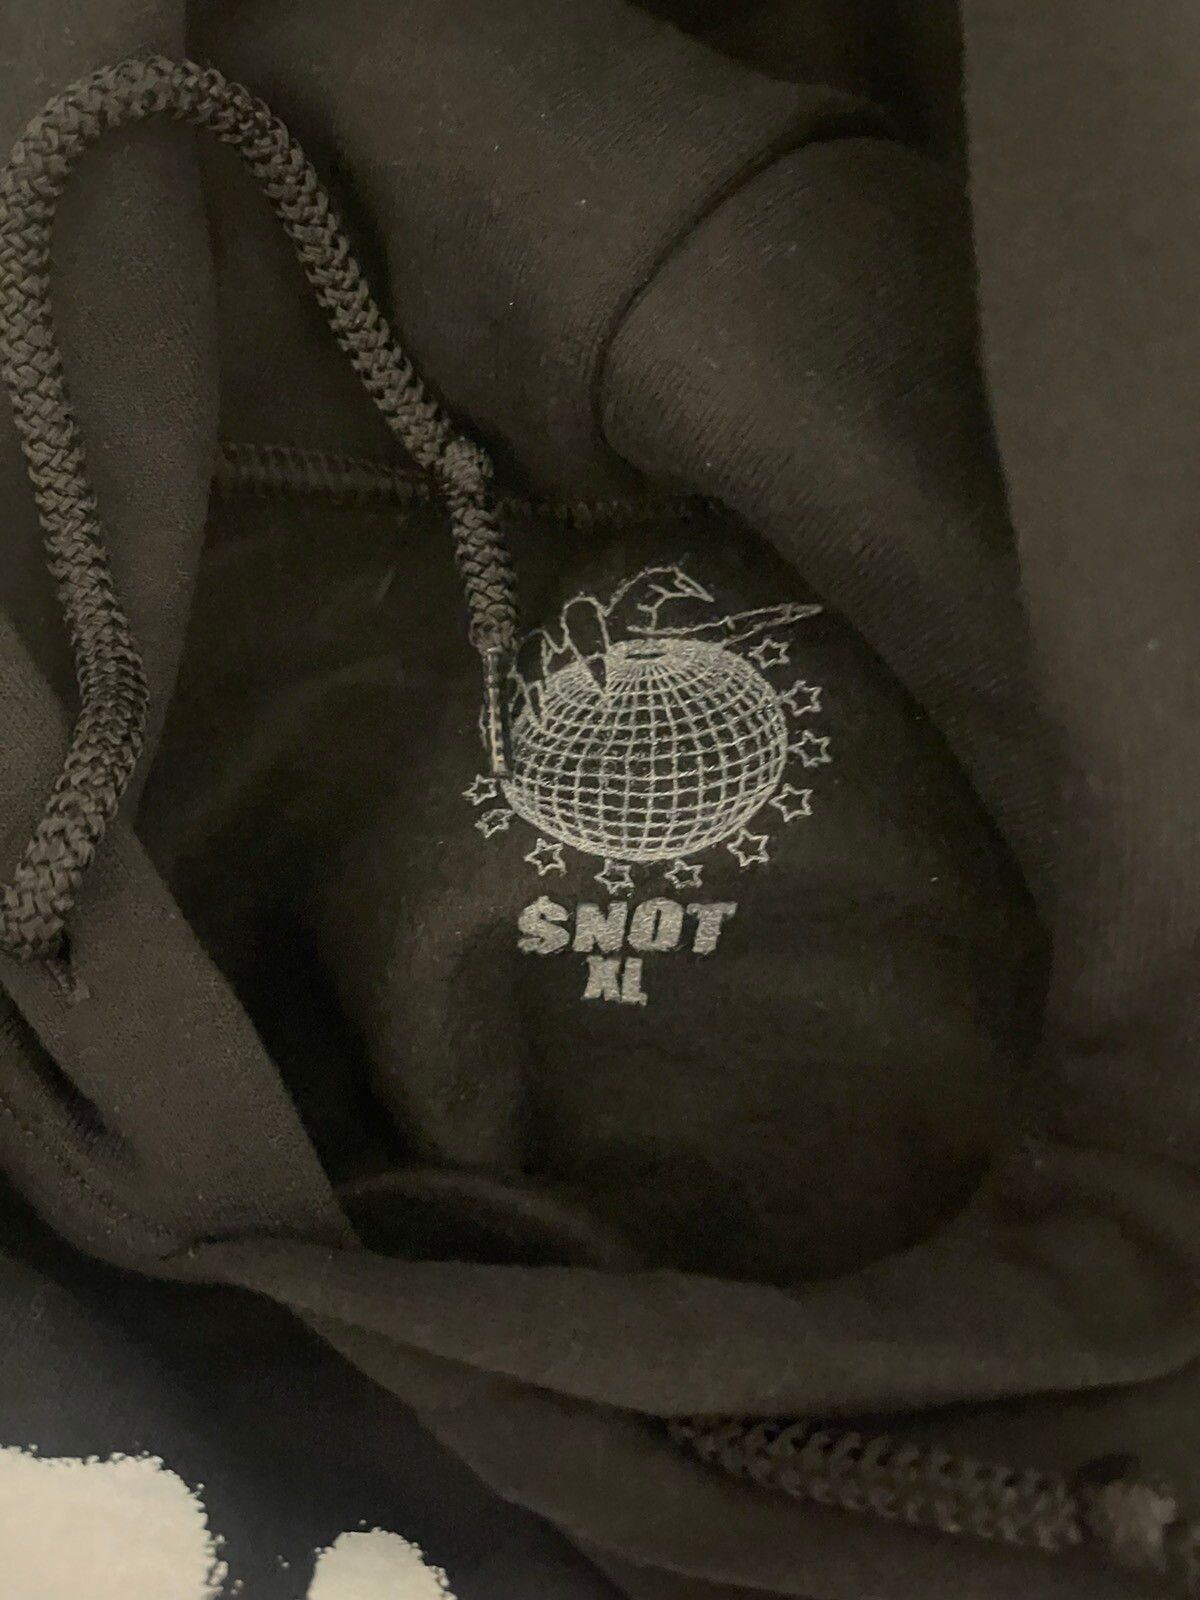 Destroy Lonely SNOT/$NOT GET BUSY OR DIE DONT GET LOST IN THE MOSHPIT HOODY Size US XL / EU 56 / 4 - 3 Preview